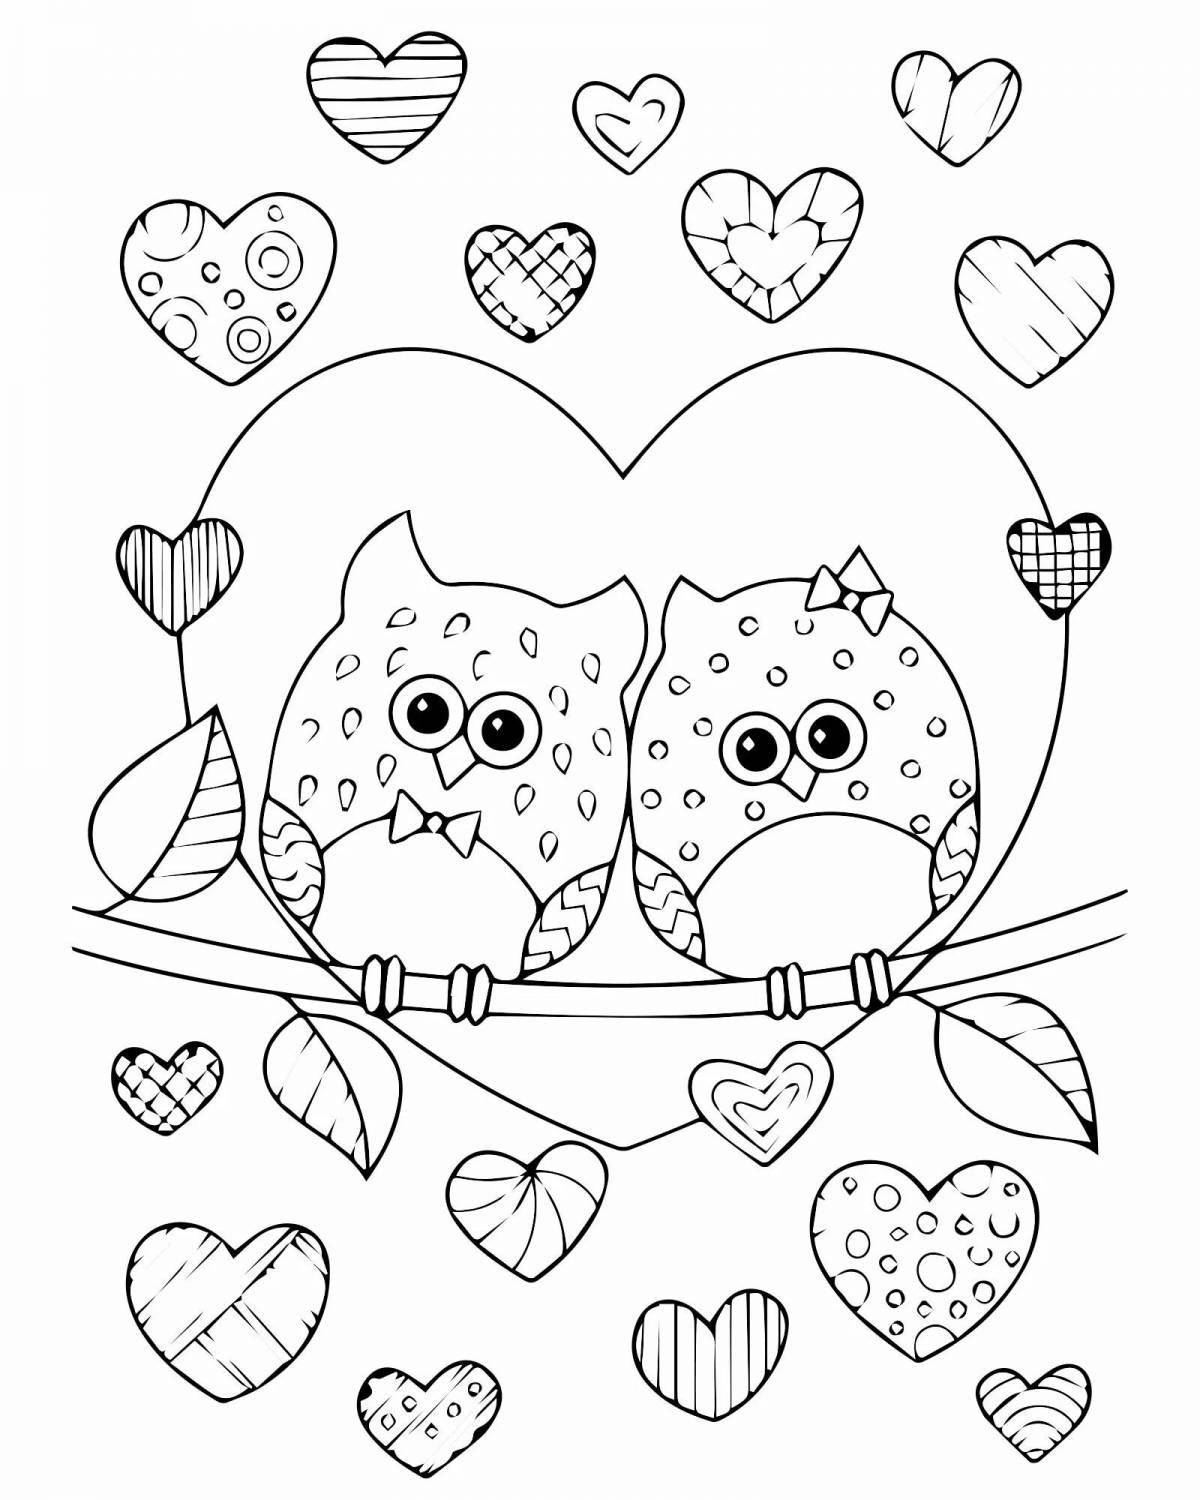 Magic valentine's day coloring book for kids